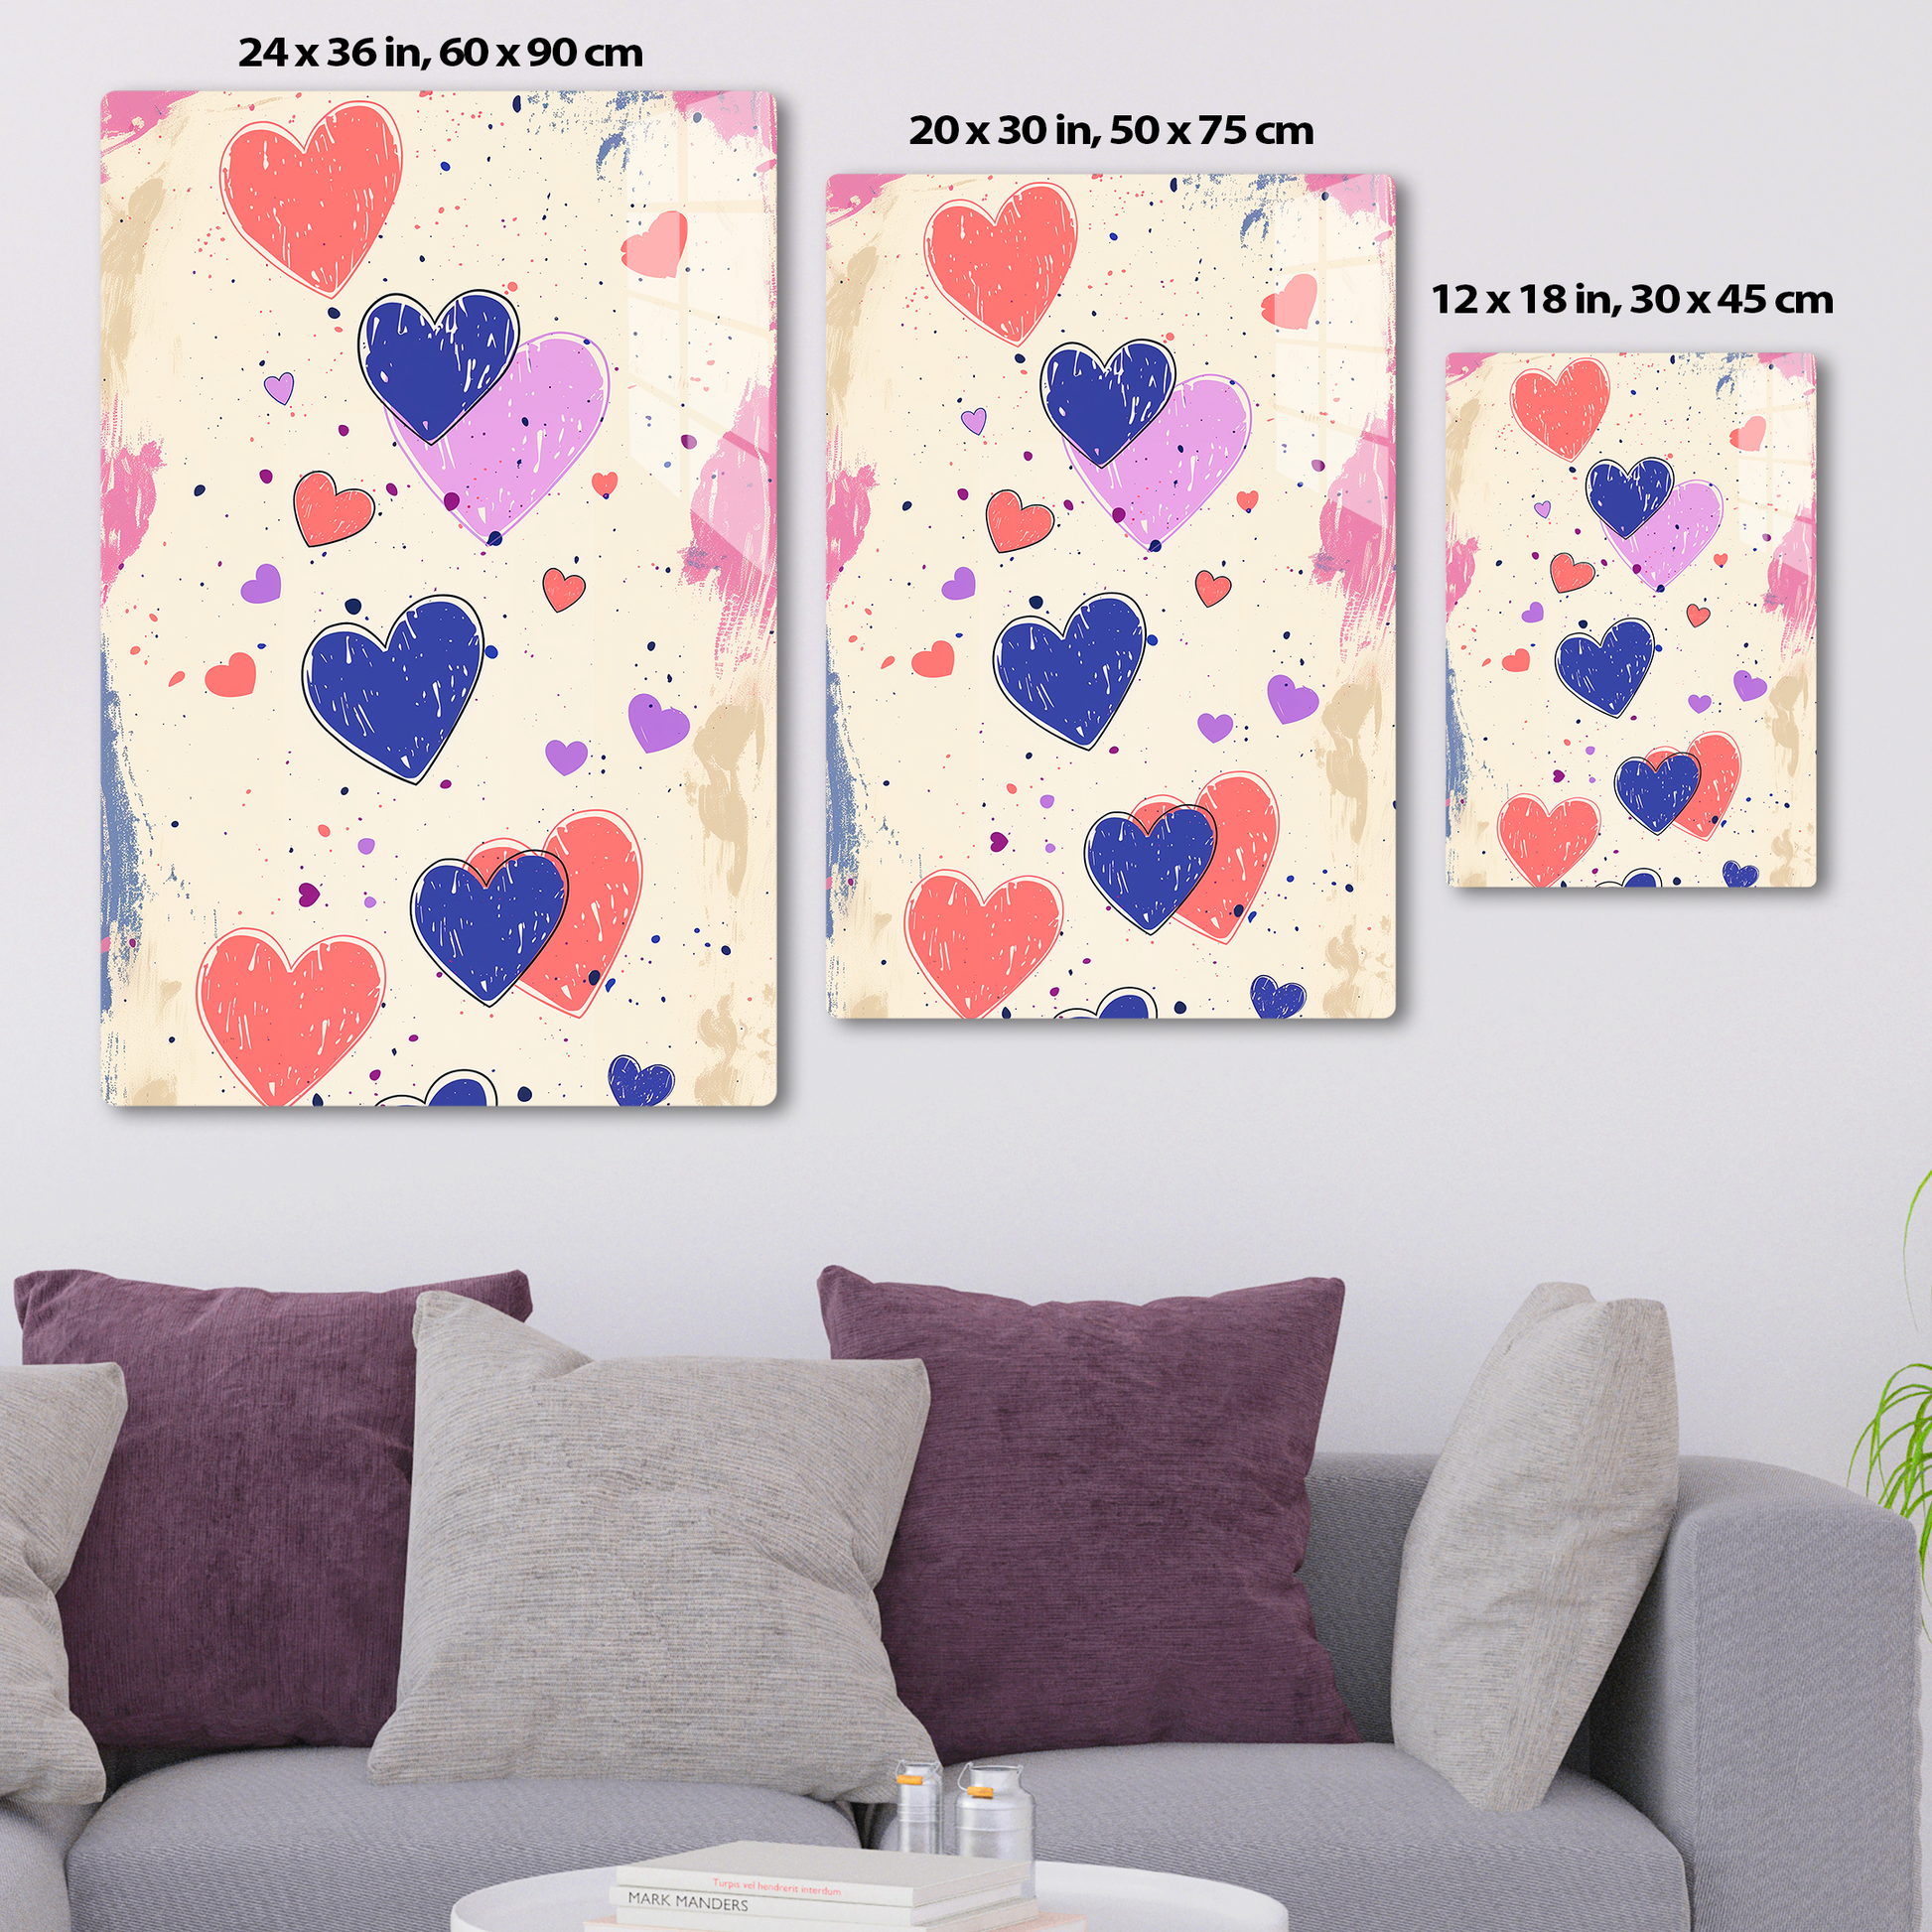 Whimsical Hearts (Acrylic)Elevate your space with our sophisticated Acrylic Prints, blending modern art with durability. Perfect for art lovers and design enthusiasts, our prints offer vibranRimaGallery